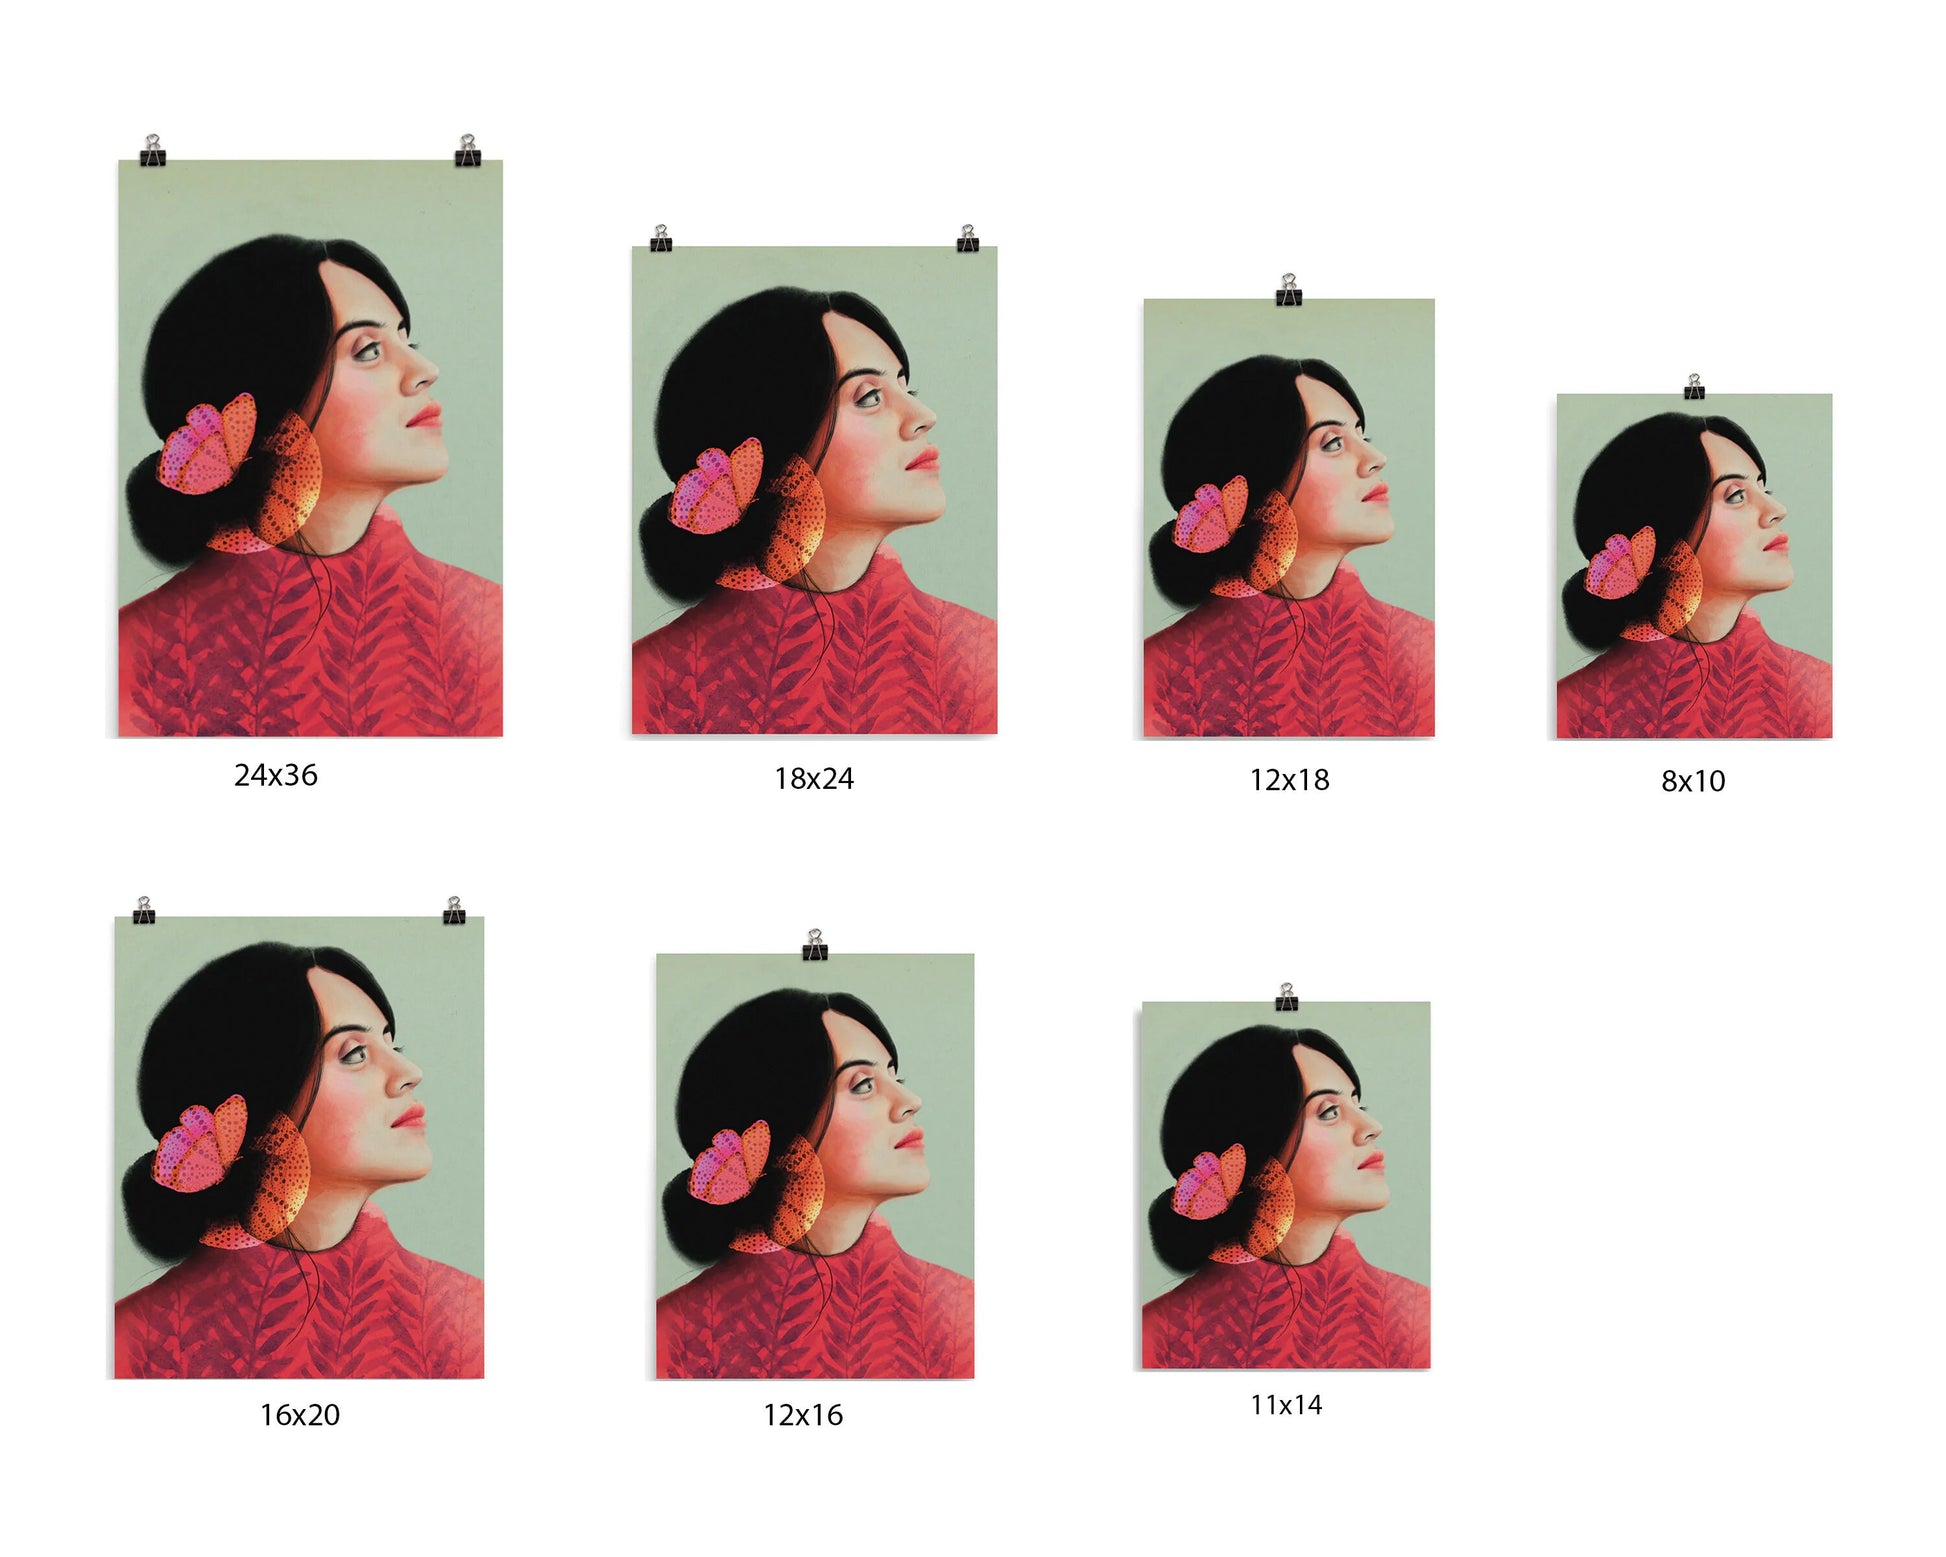 A side face portrait of a light skinned woman with black hair in bun in pinkish red dress with leaves pattern wearing a big earring & a orange, pink butterfly on  green background art posters in 24x36, 18x24, 16x20, 12x18, 12x16, 11x14 & 8x10 inches